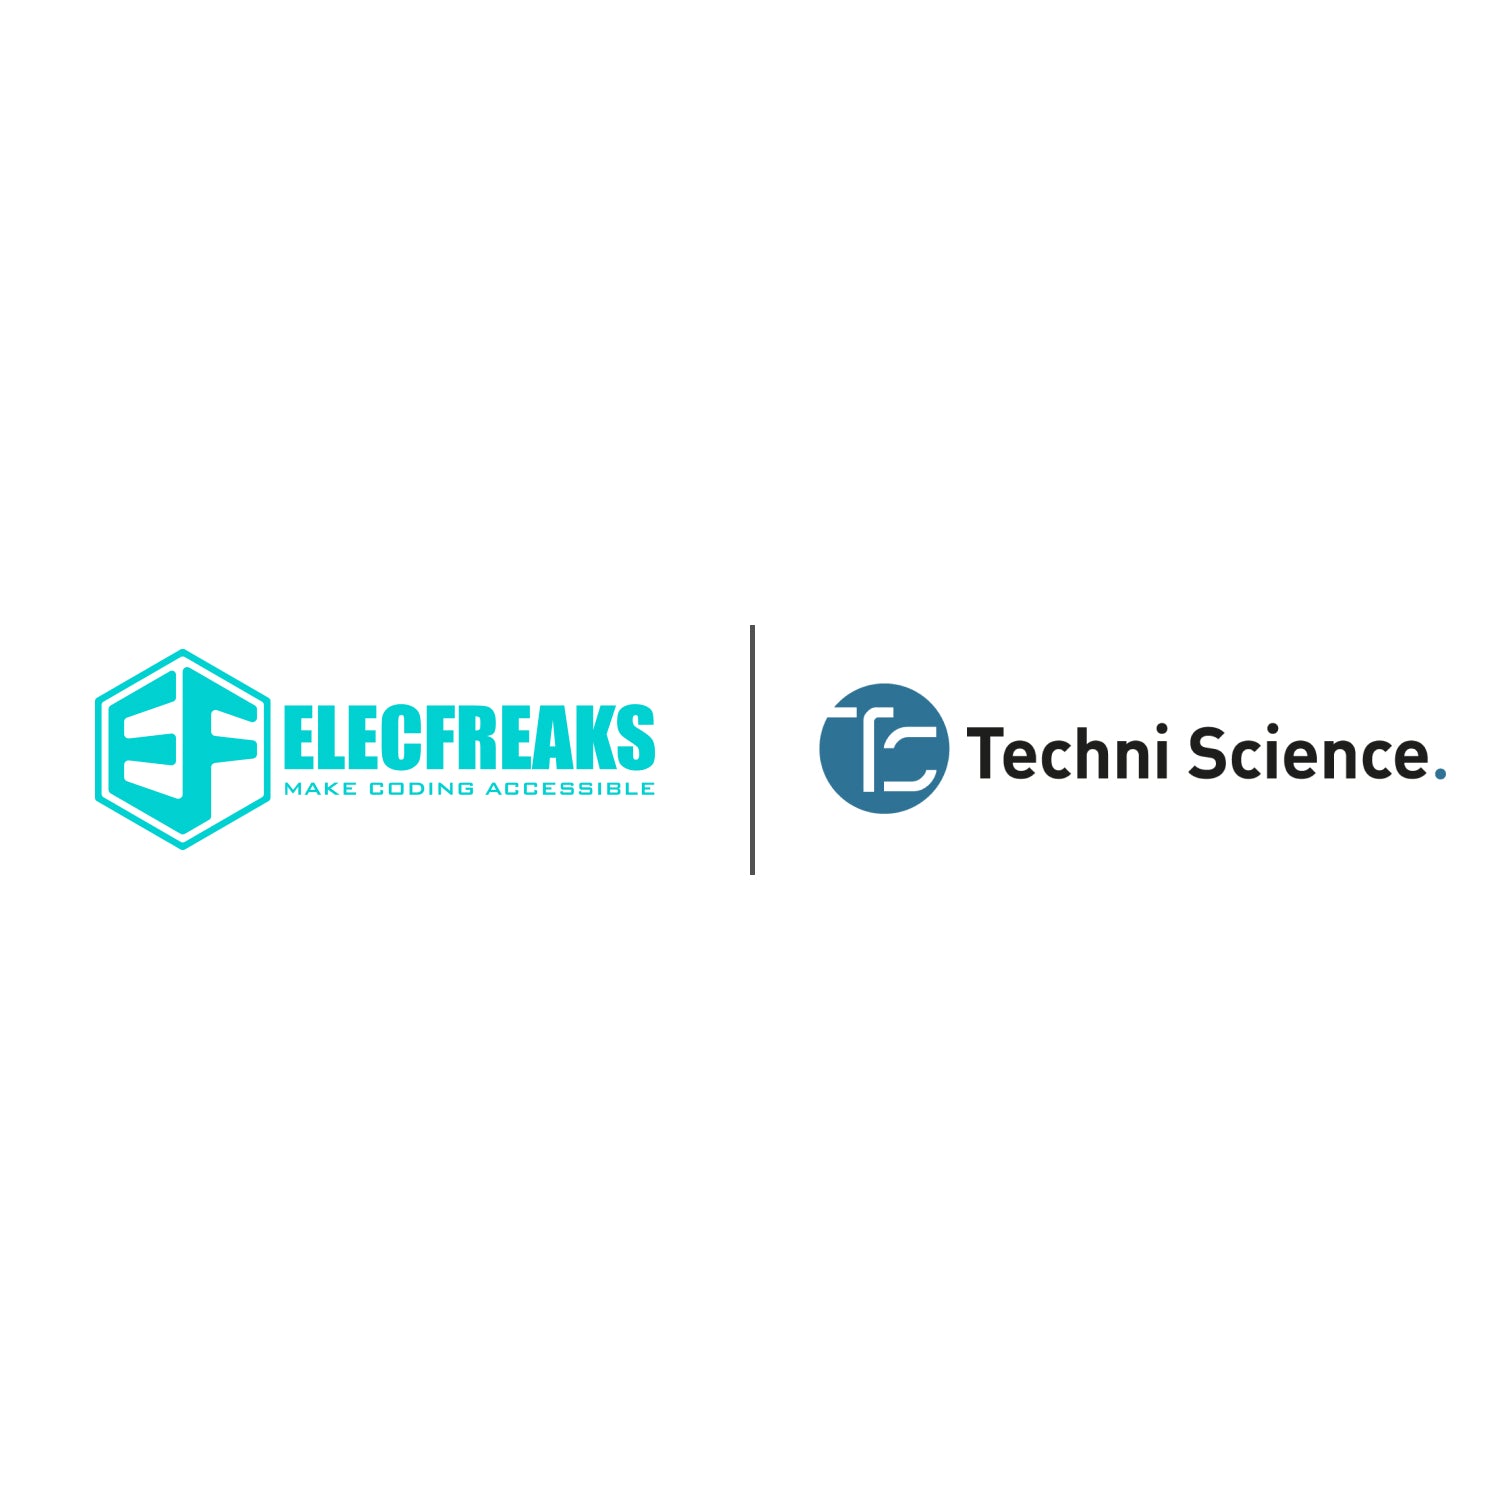 Our New Distributor——Techni Science